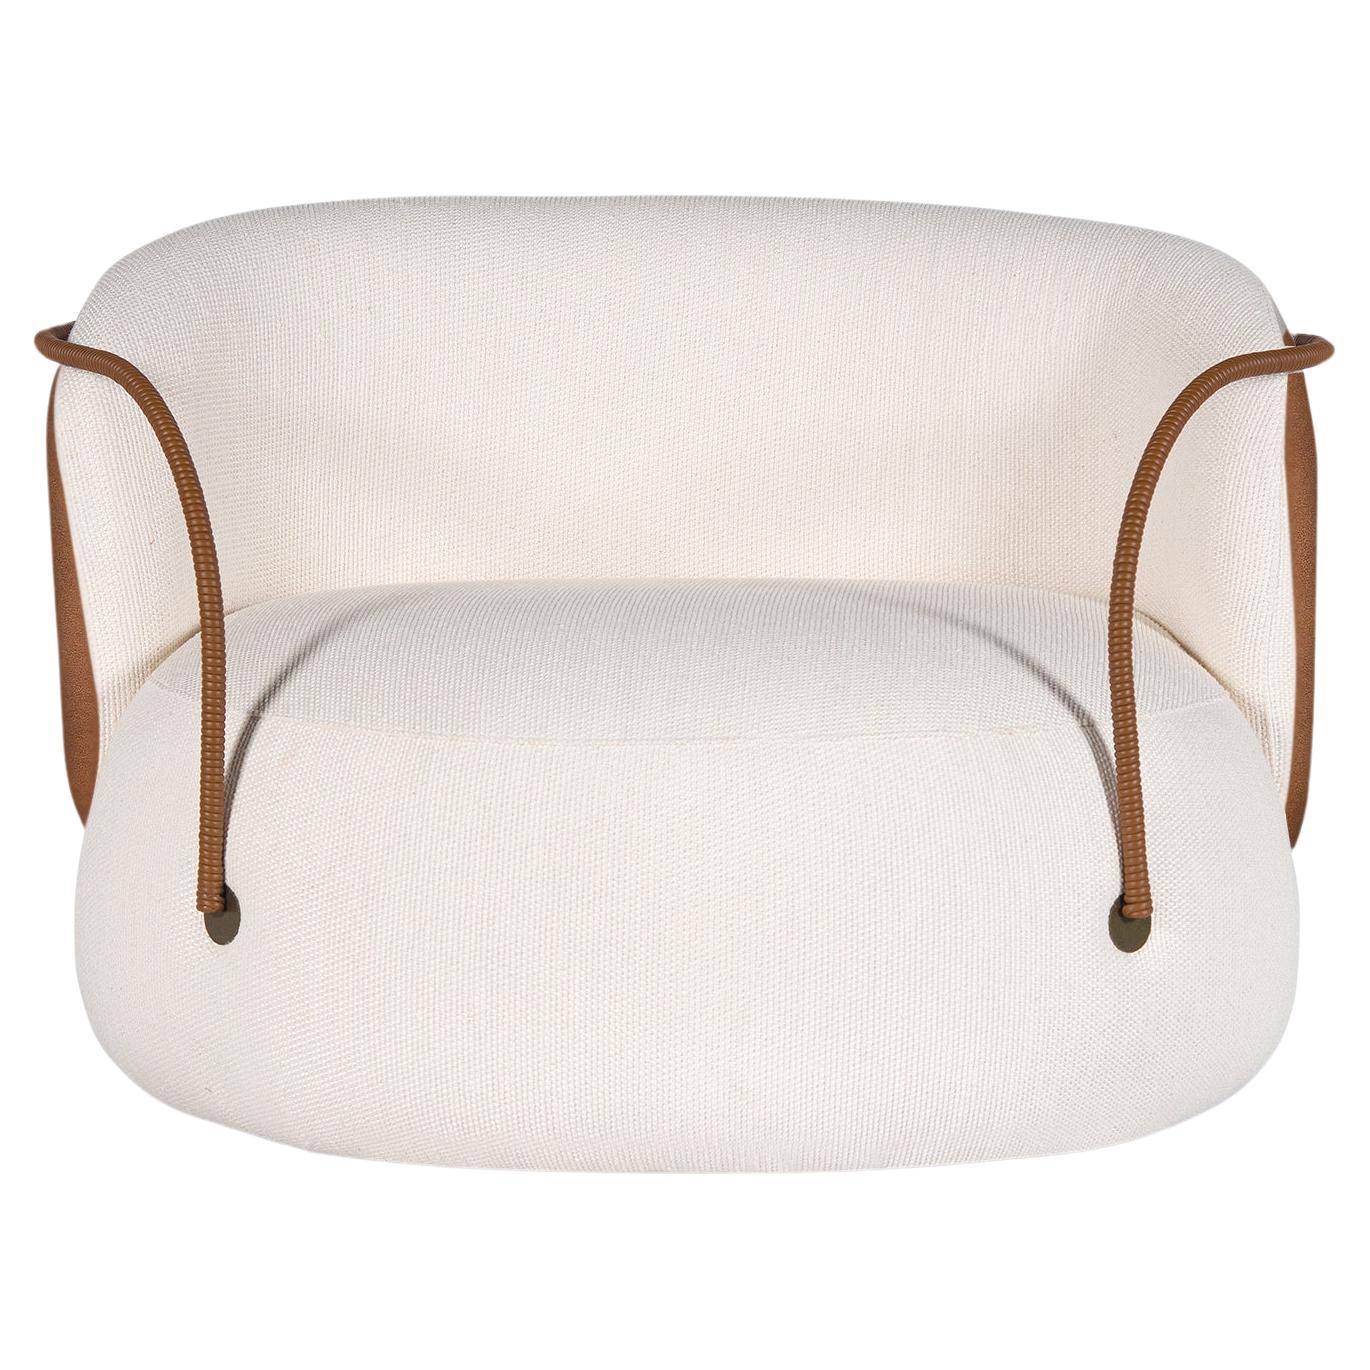 Pietra from Italian: Stone
The Pietra swivel armchair is designed with pure, organic shape. Covered with a mix of comfortable fabrics: off-white boucle on the front and polyester with a “natural skin” finish in coffee color on the back. It has a